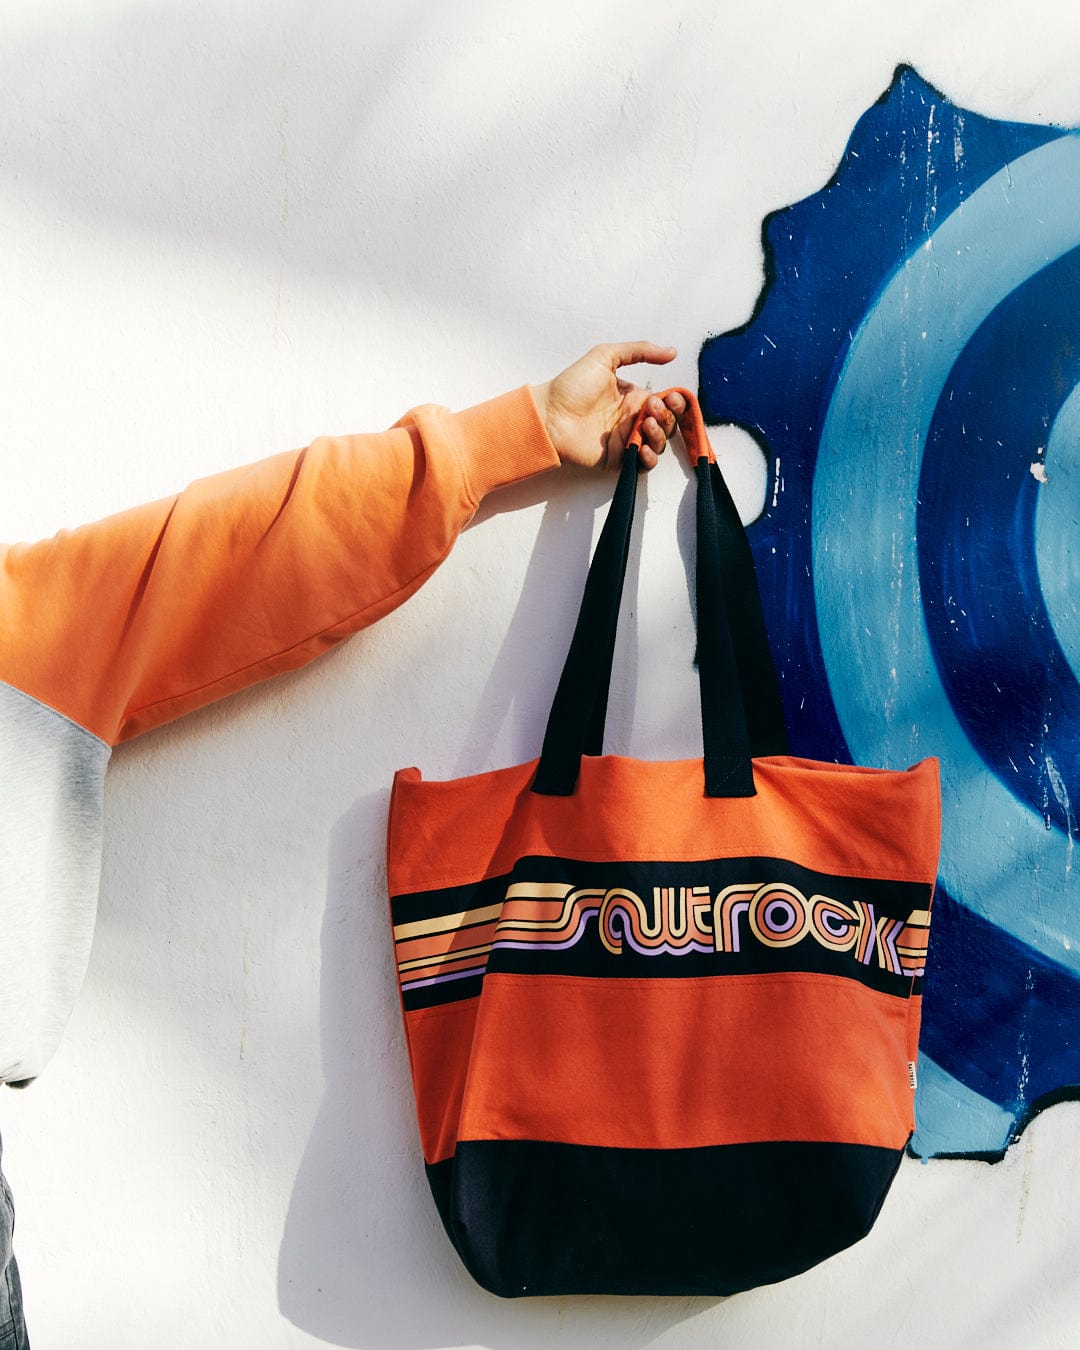 A person in an orange jacket with durable hand covers reaching for a Saltrock Cora Retro Beach Bag - Coral hanging on a white wall with blue graffiti.